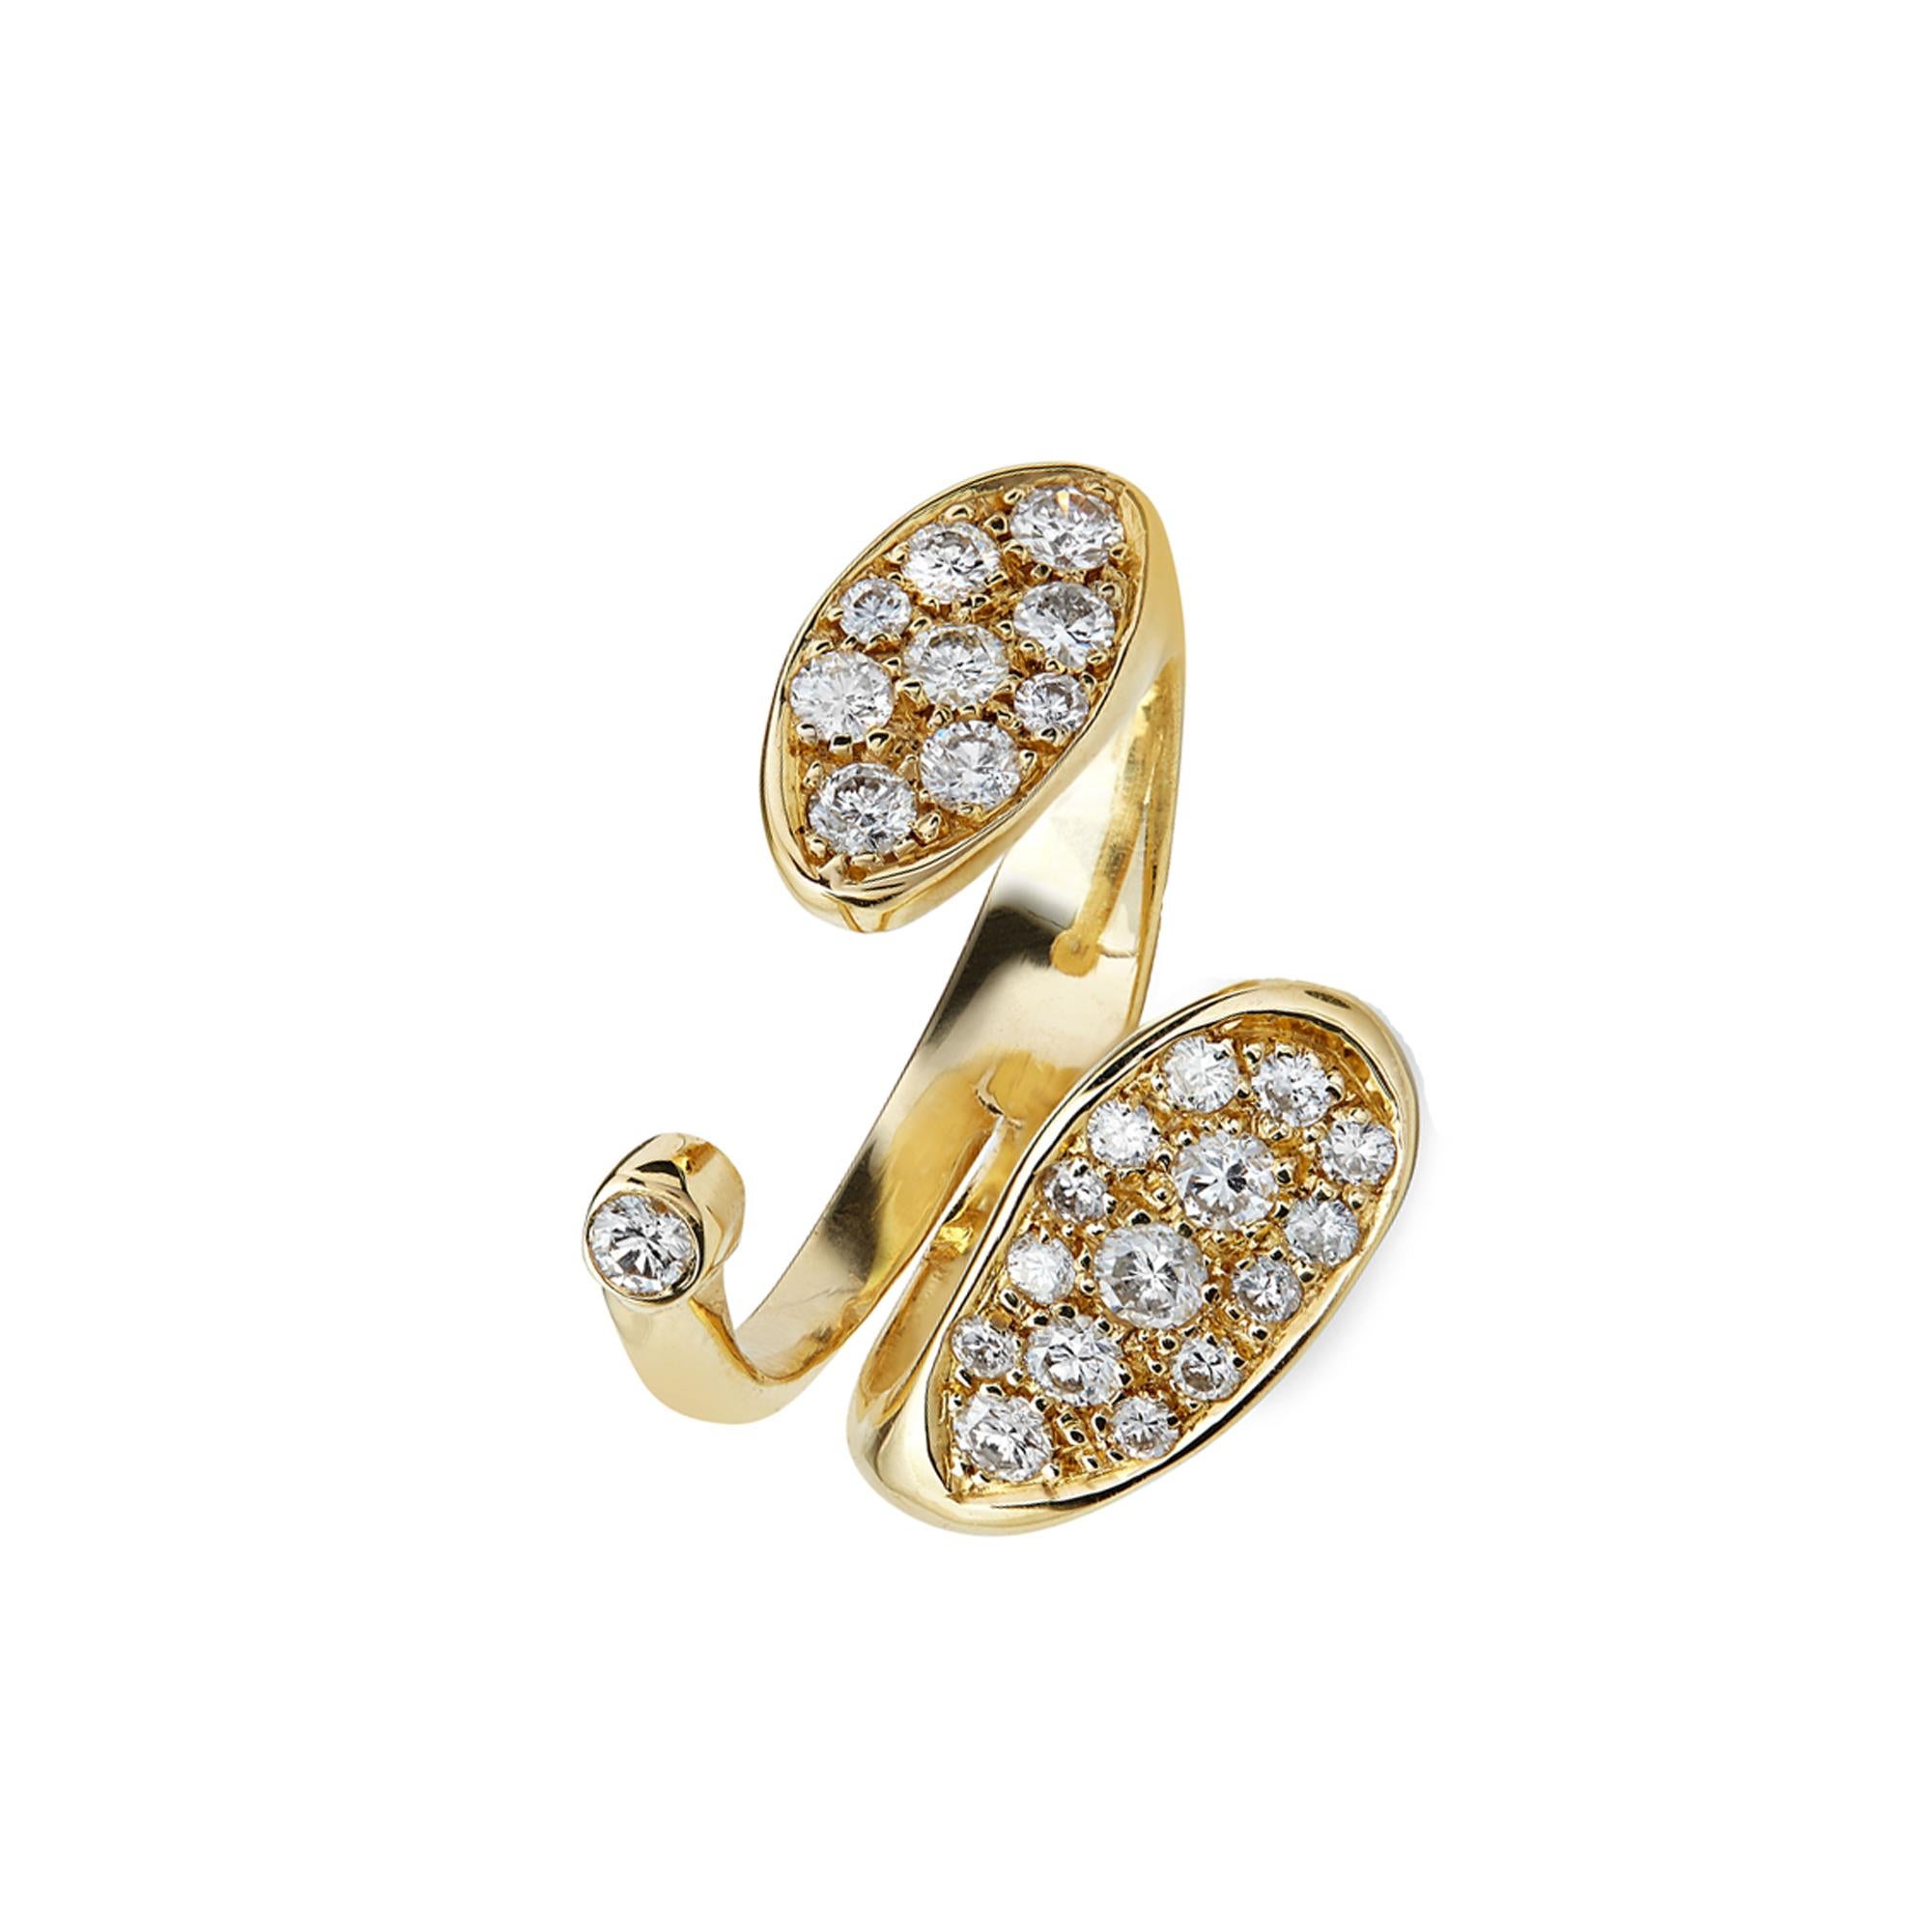 Round Cut Handmade Open Form Pave Diamond Ring 18k Gold Diamond Pave Stations For Sale